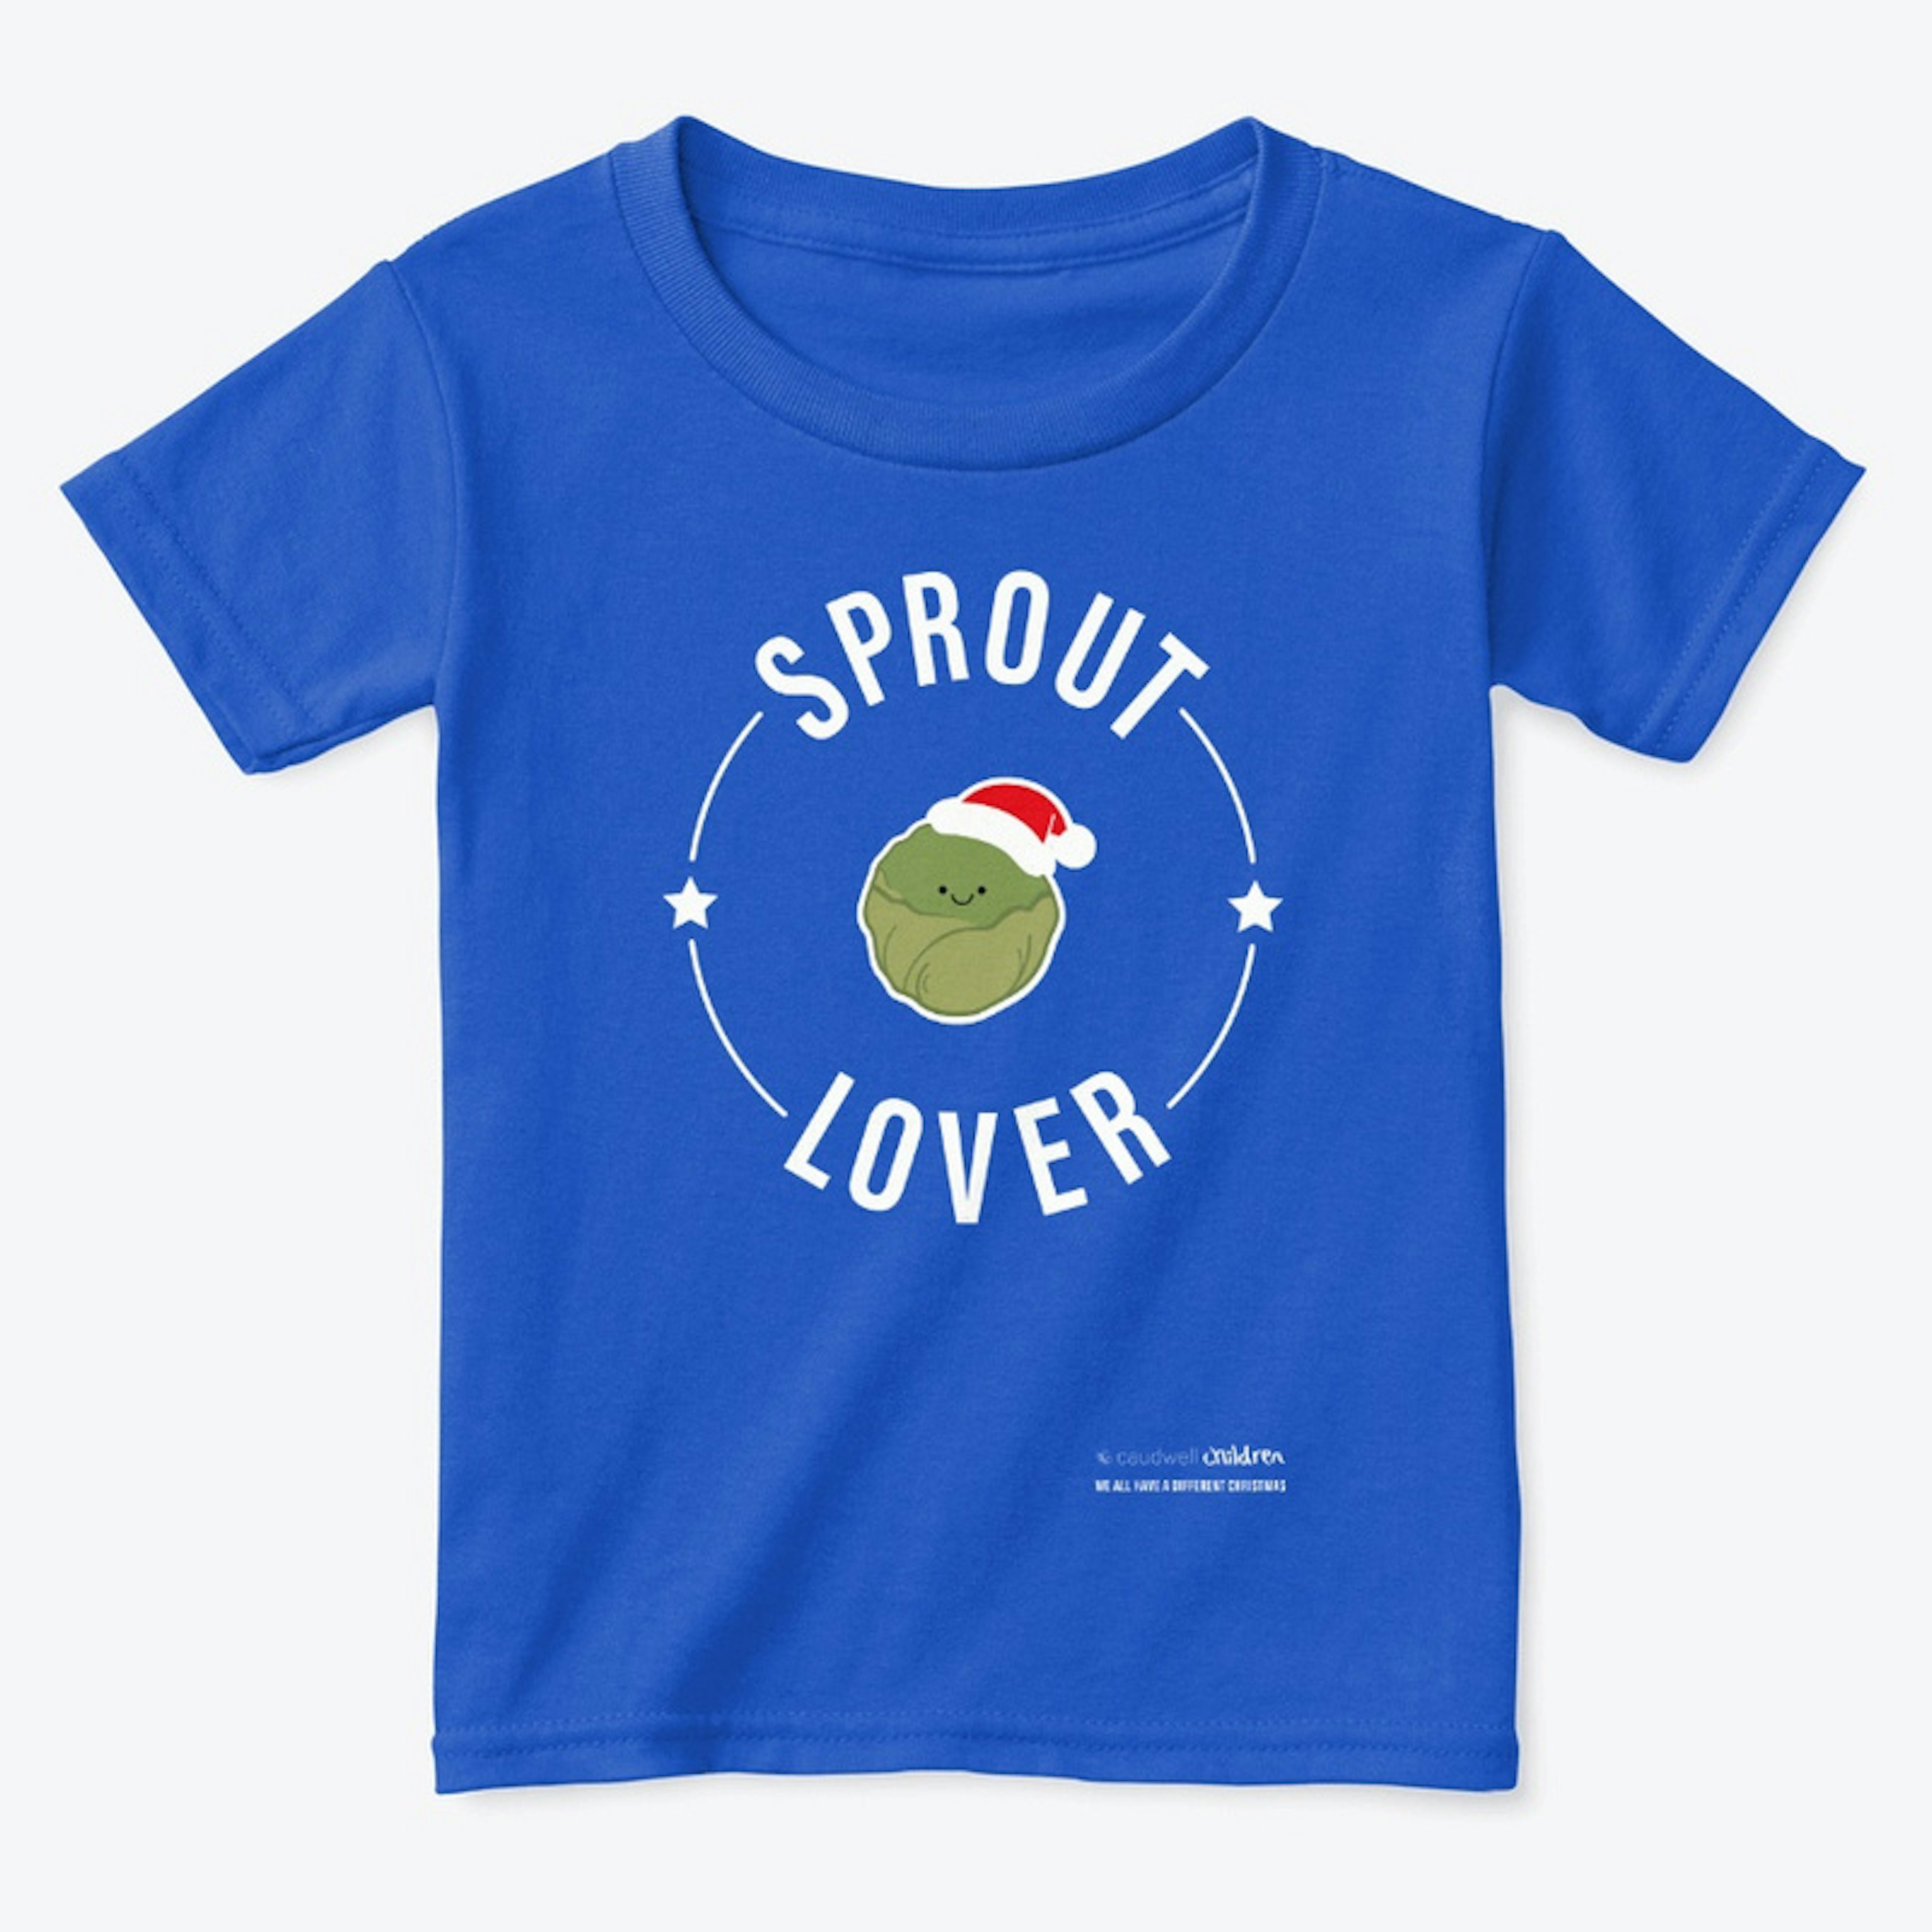 Sprout Lover